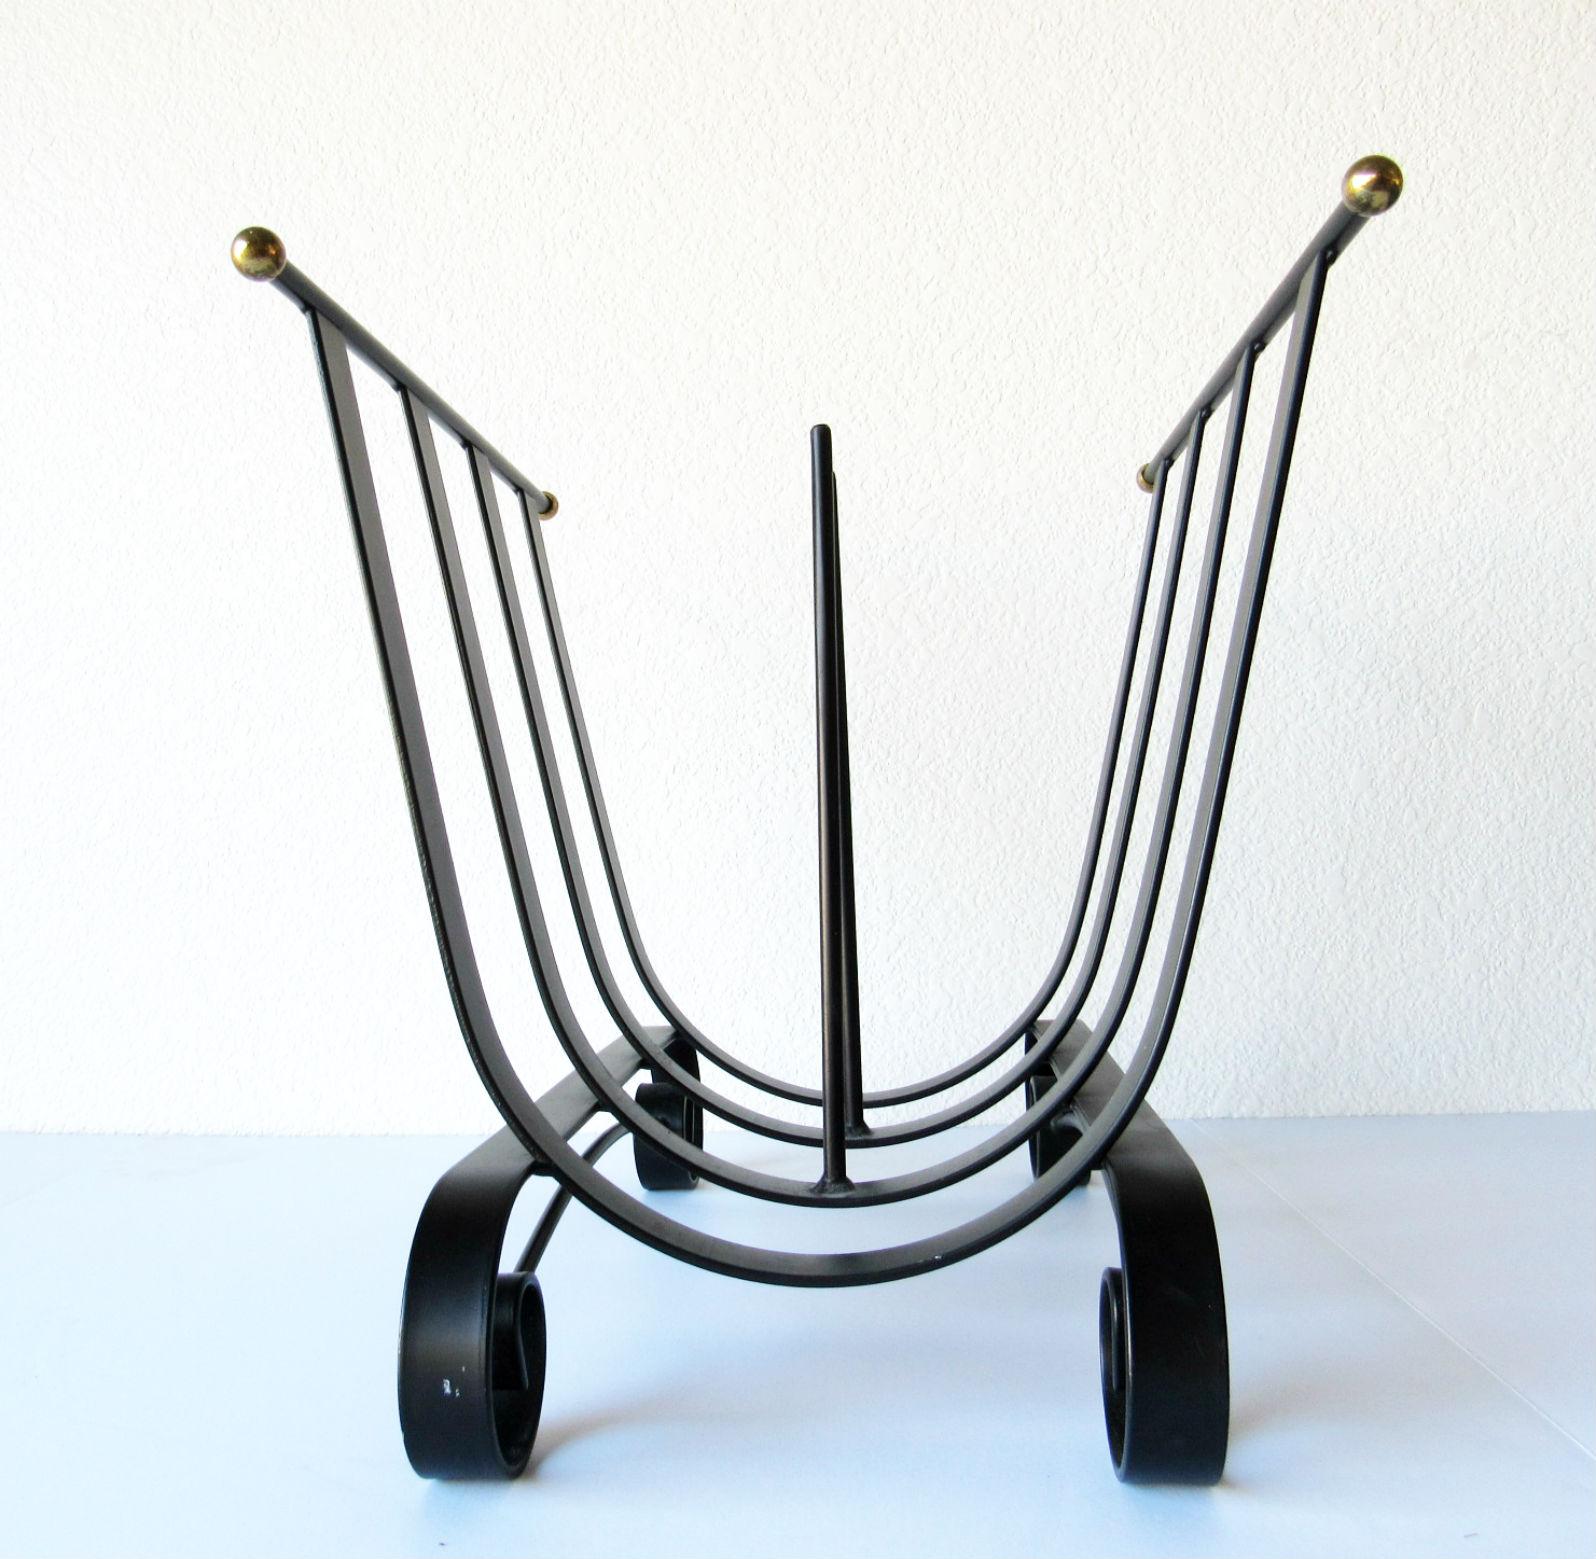 20th century design wrought iron log holder or magazine holder. Black wrought iron holder with brass ball caps, Mid-Century Modern, in very good condition.